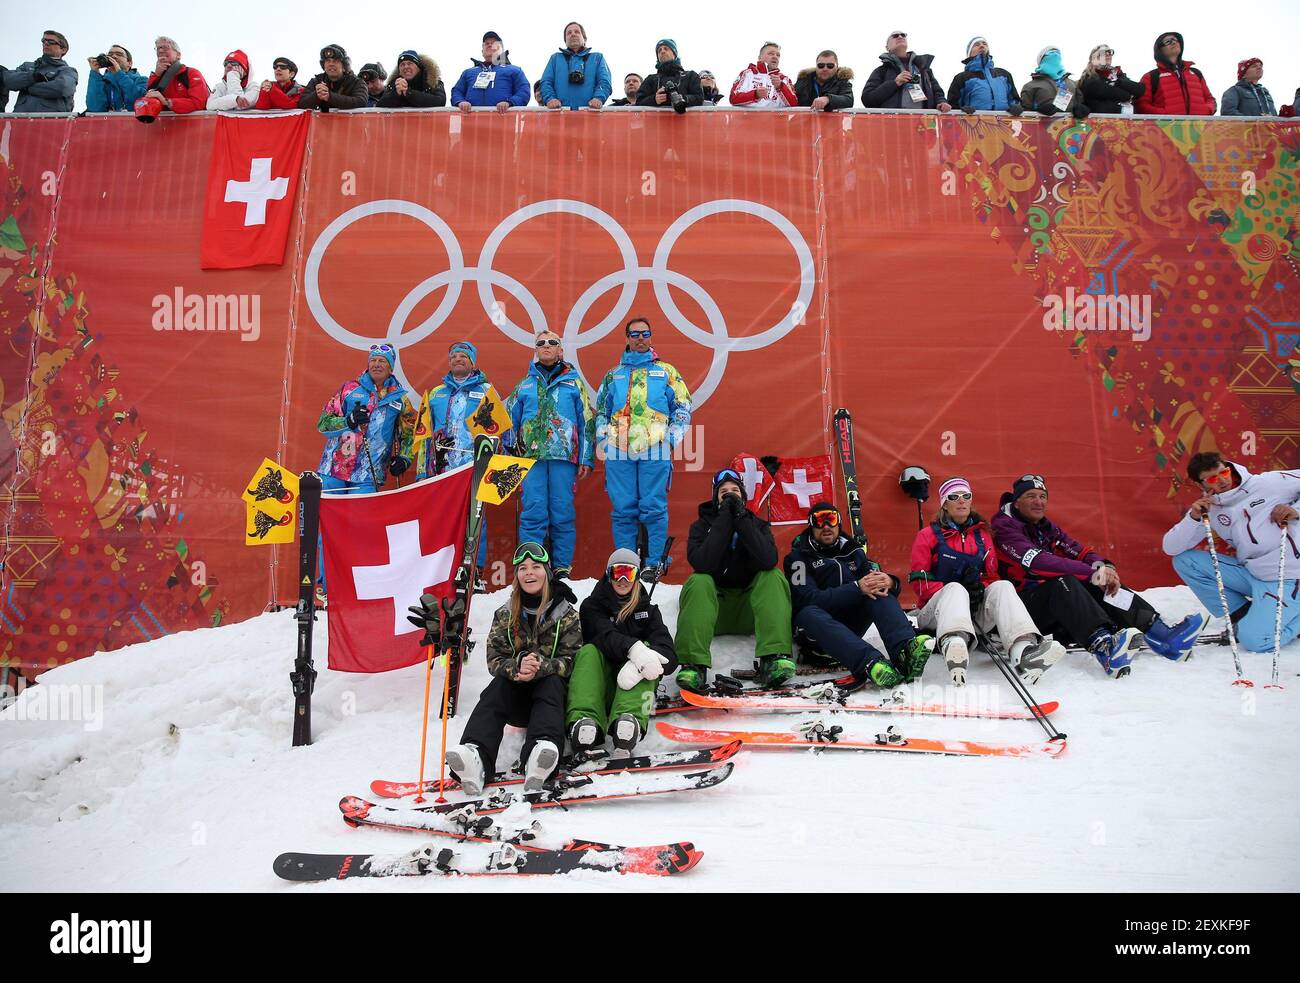 Spectators watch the finish of the men's alpine skiing downhill at the Rosa Khutor Alpine Center during the Winter Olympics in Sochi, Russia, Sunday, Feb. 9, 2014. (Photo by Brian Cassella/Chicago Tribune/MCT/Sipa USA) Stock Photo